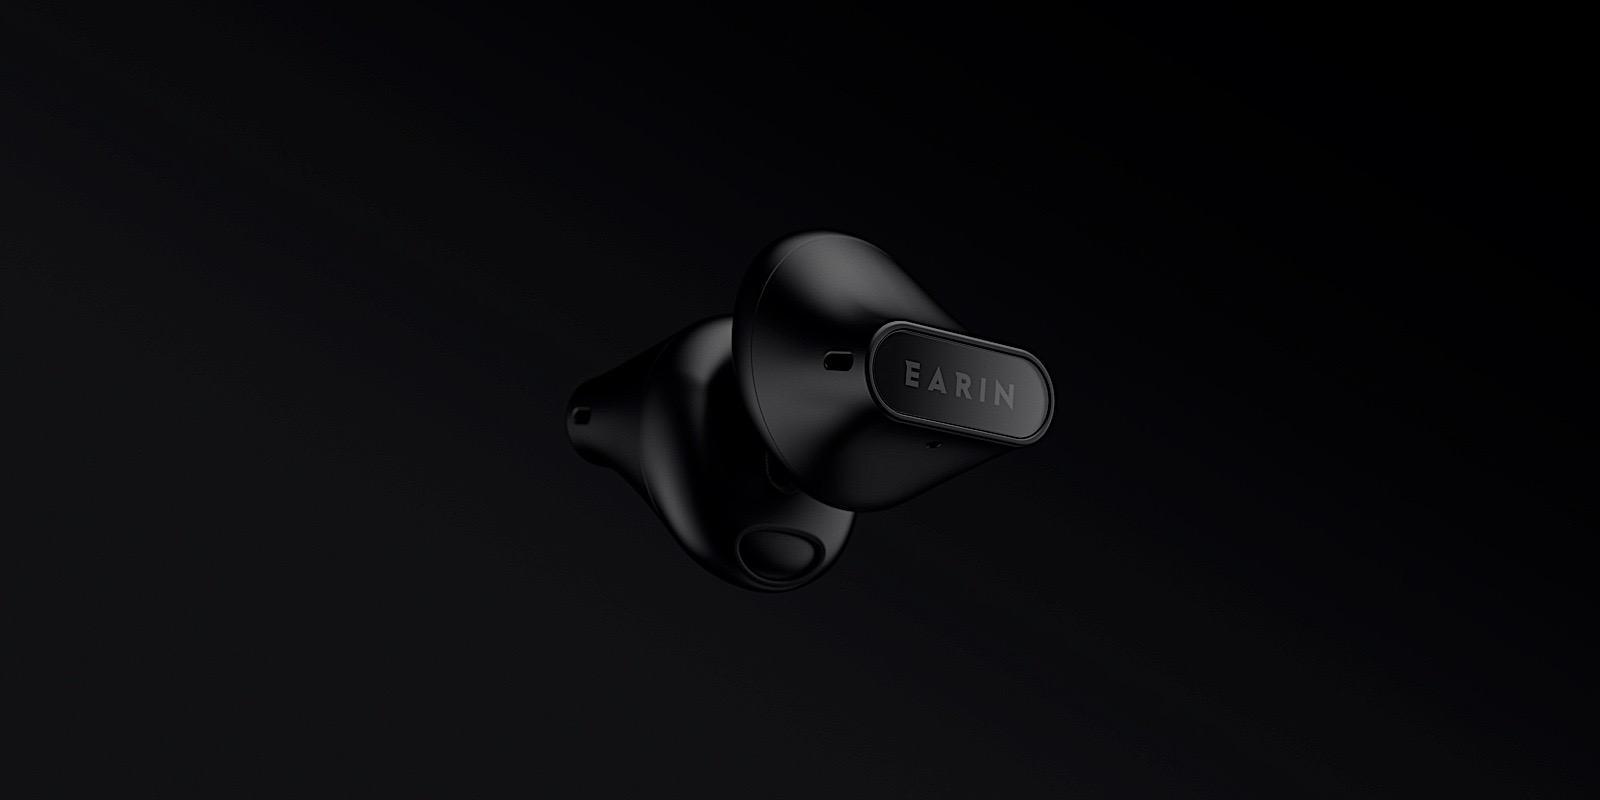 Earin S A 3 True Wireless Earbuds Have An Open Design With No Ear Tips - until dawn roblox pain scream